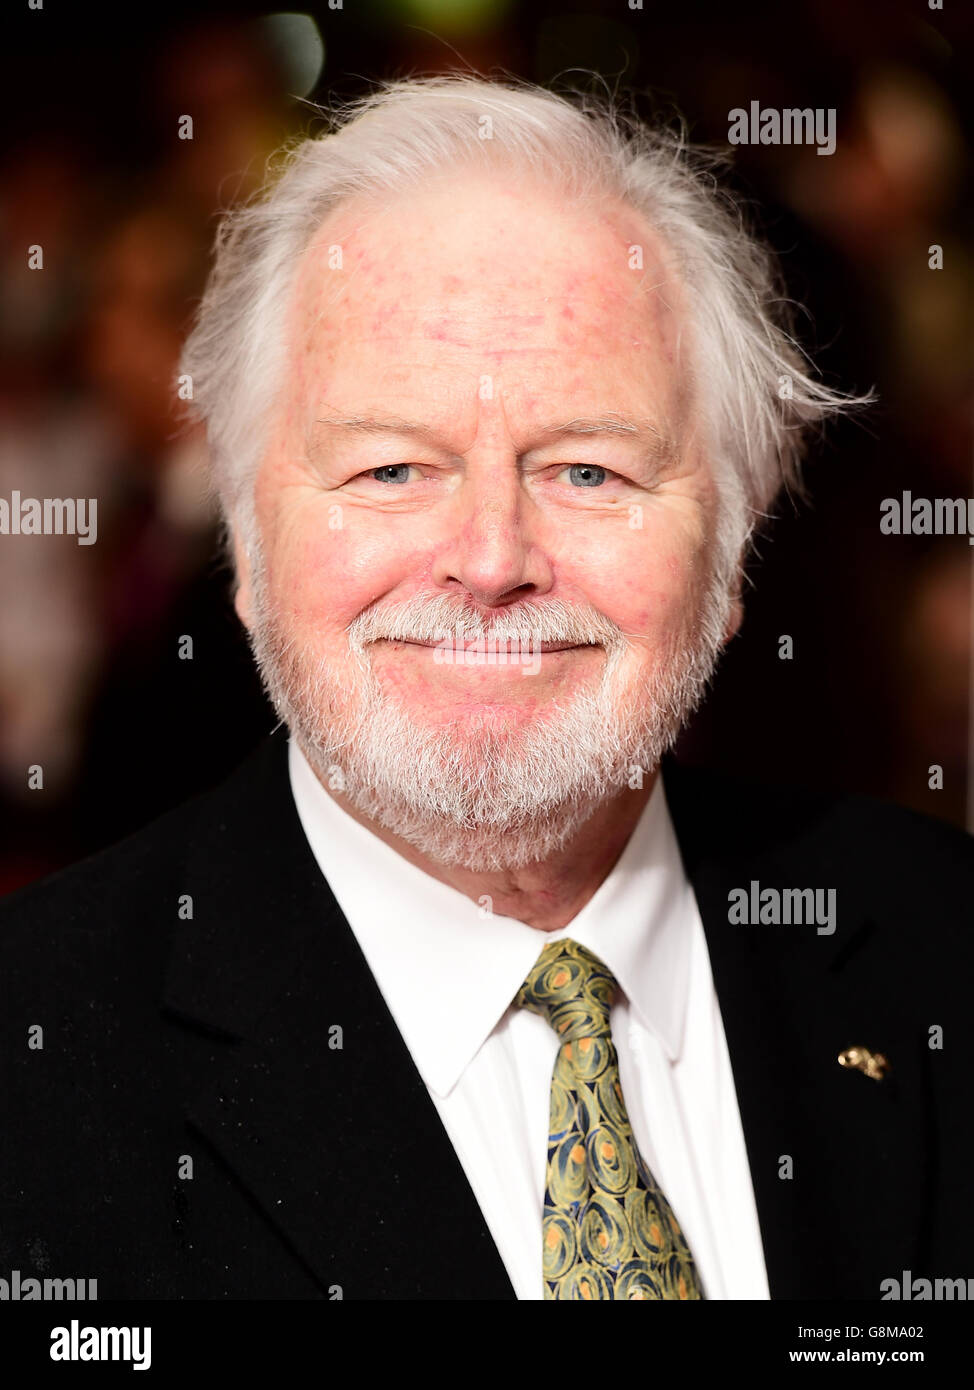 Ian Lavender attending the World premiere of Dad's Army at the Odeon Leicester Square, London. PRESS ASSOCIATION Photo. Picture date: Tuesday 26th January, 2016. Photo credit should read: Ian West/PA Wire. Stock Photo